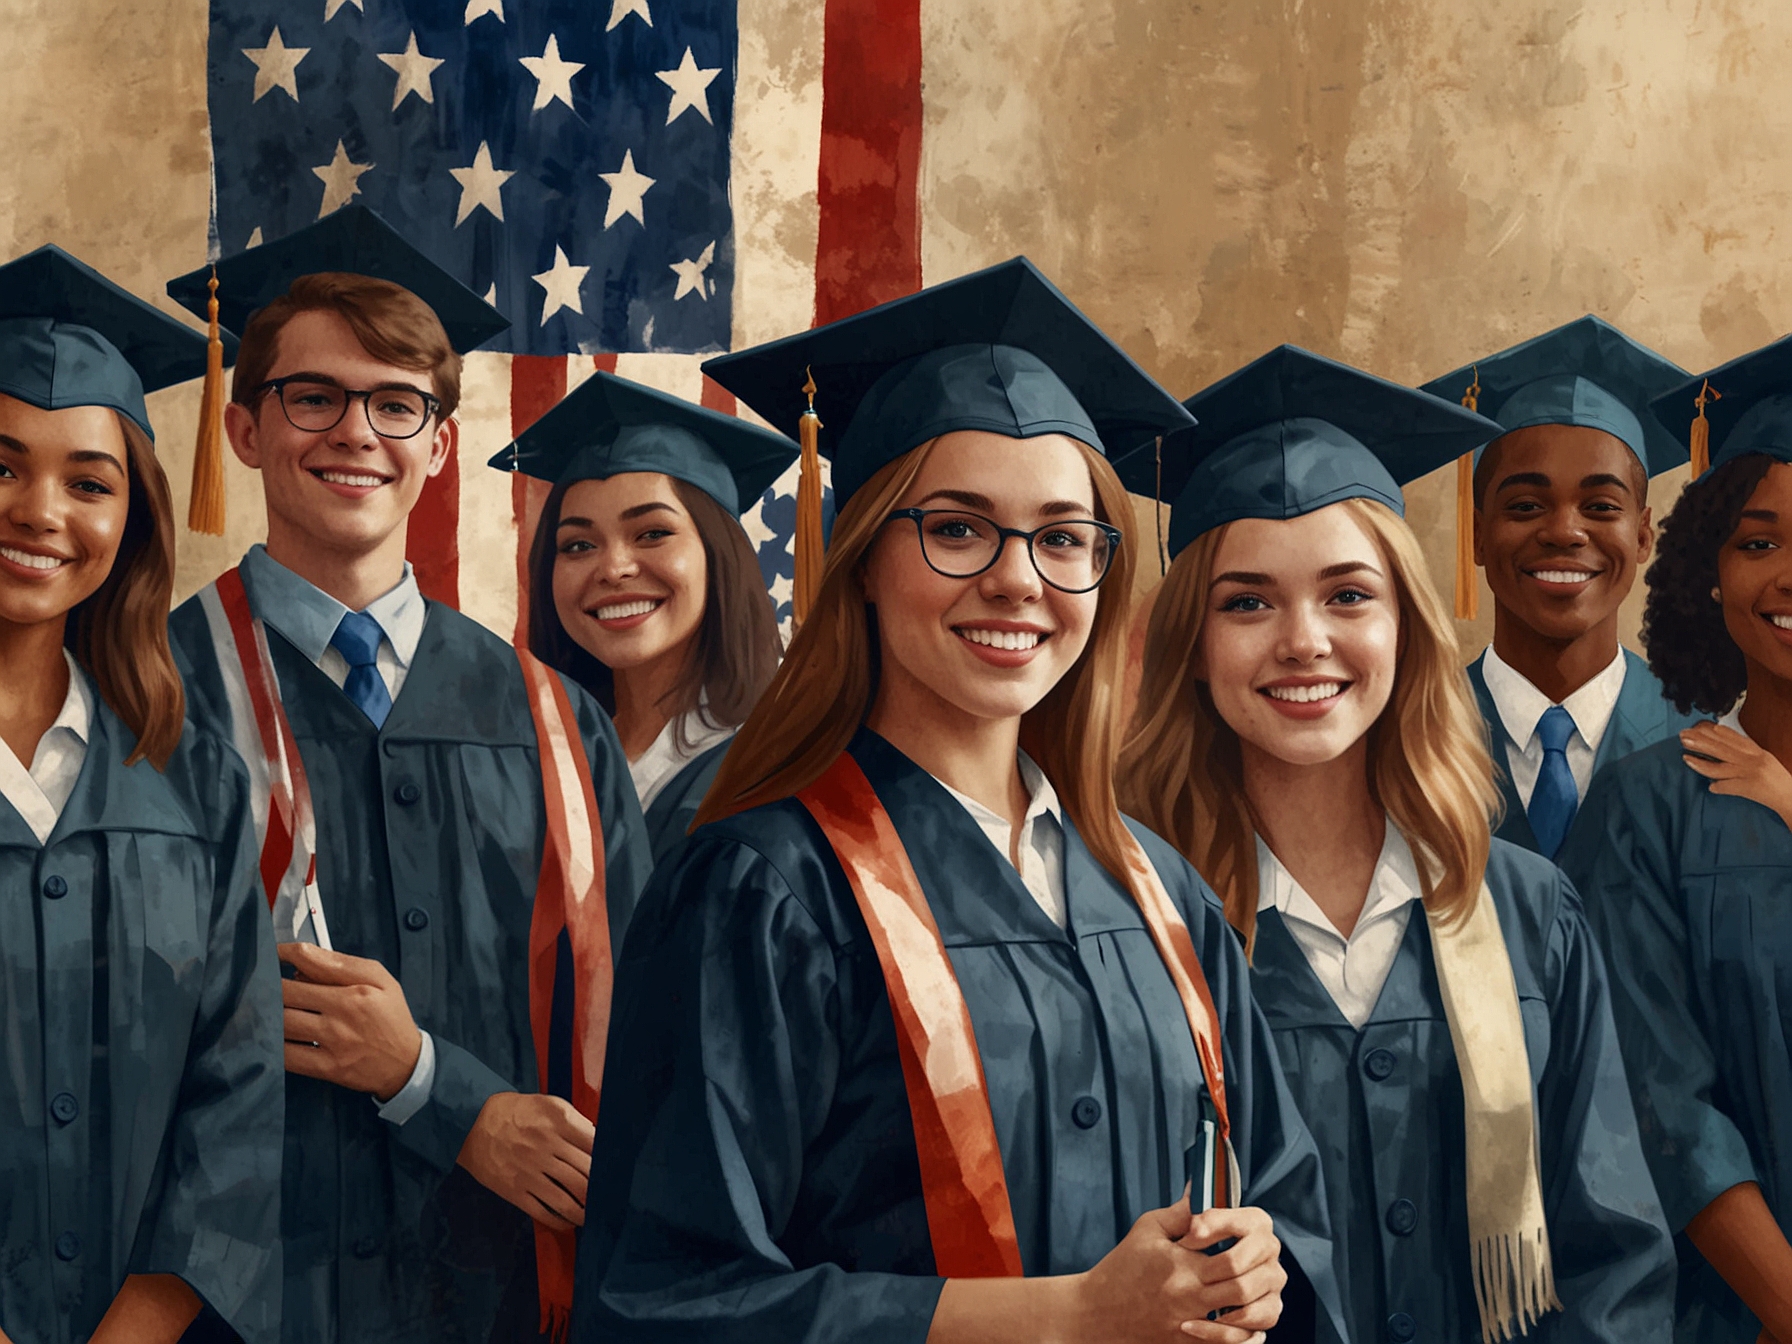 A diverse group of students in graduation attire with American flags, representing the potential influx of international talent benefiting the U.S. workforce and economy.